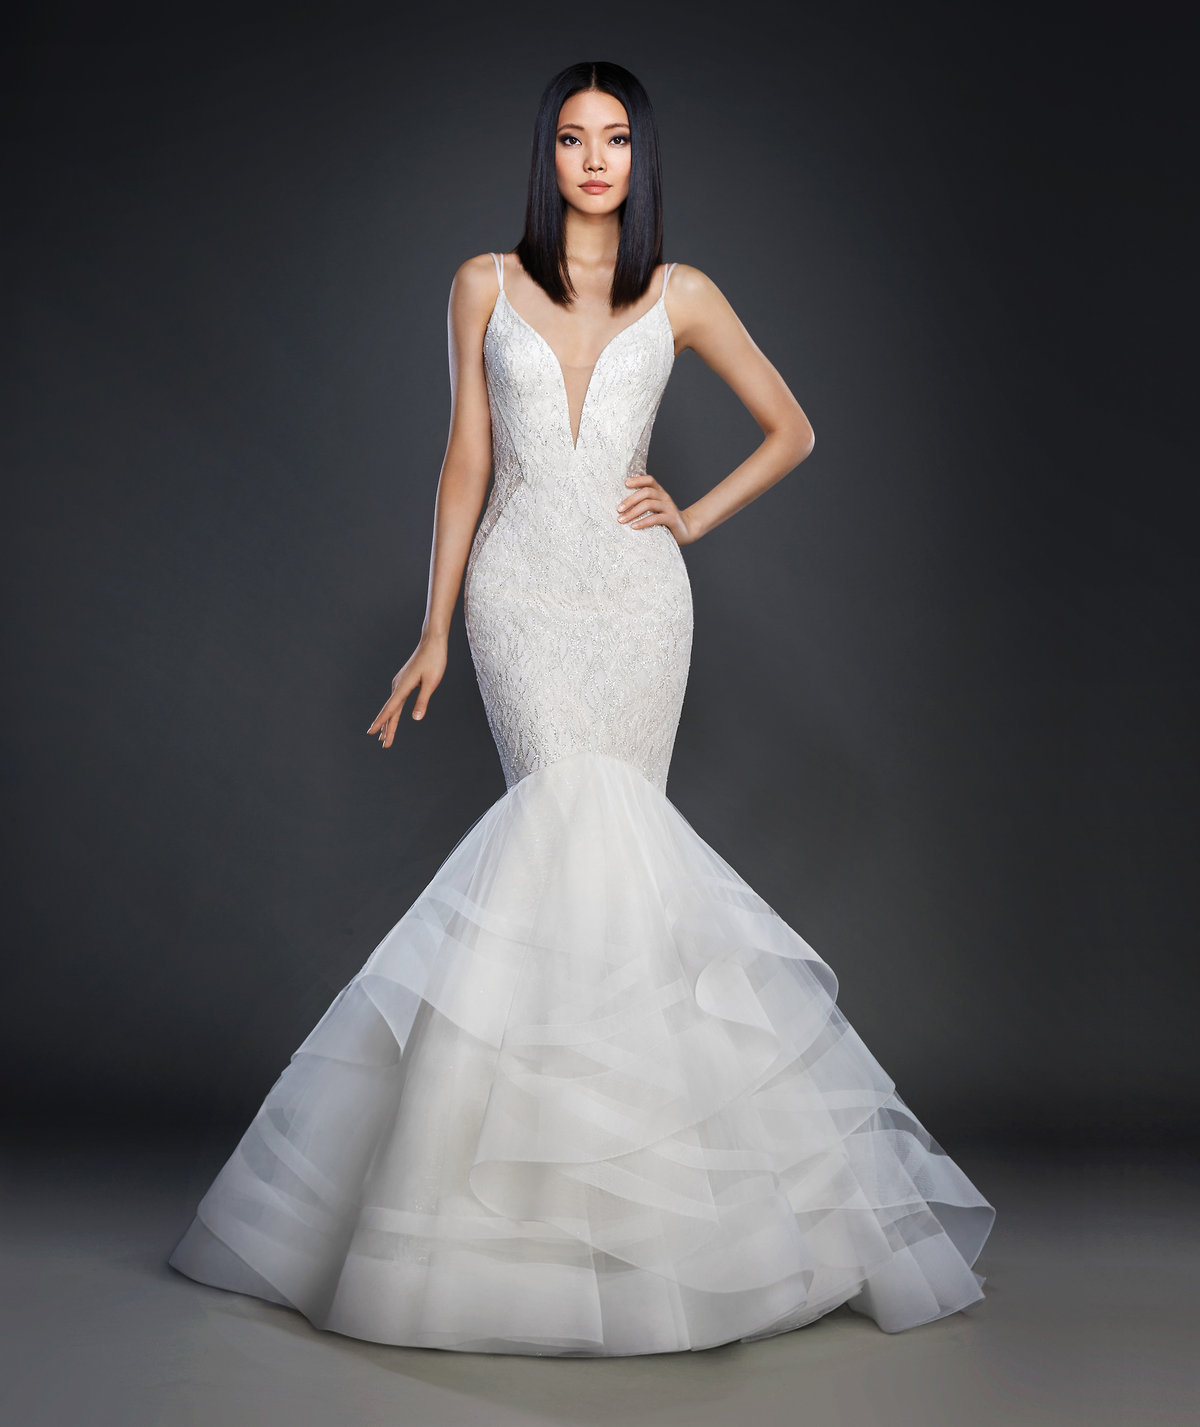 Bridal Gowns and Wedding Dresses by JLM Couture - Style 3704